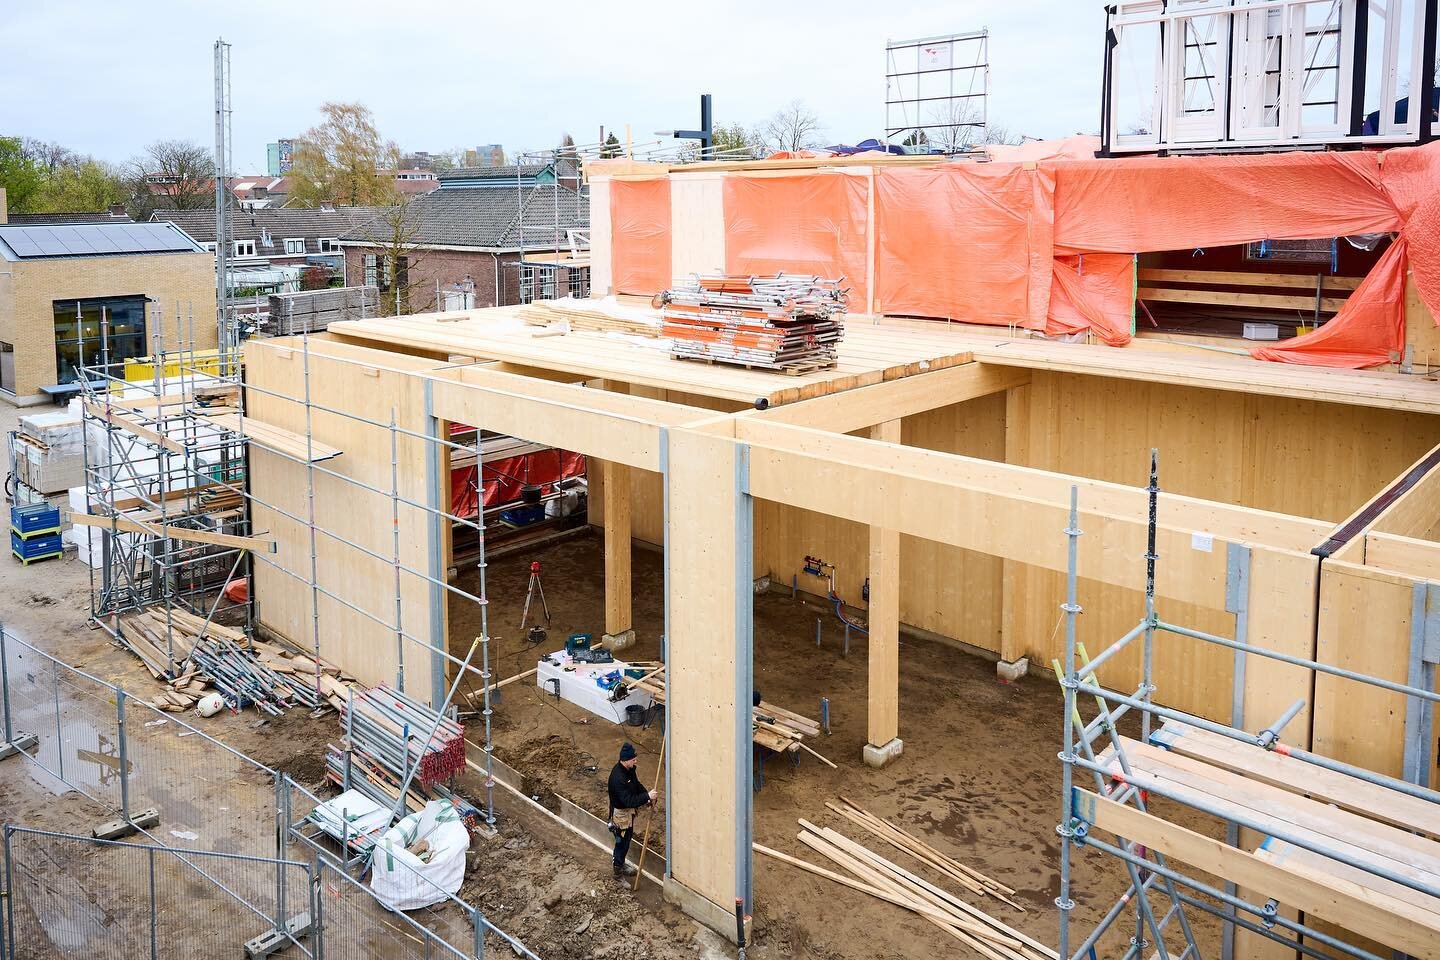 The Body Building is rising! A radically sustainable building being the first of its kind in NL built from a combination of CLT and hemp lime. Designed as a permanently changing, never finished body, with a green roof. It will house artist studios an